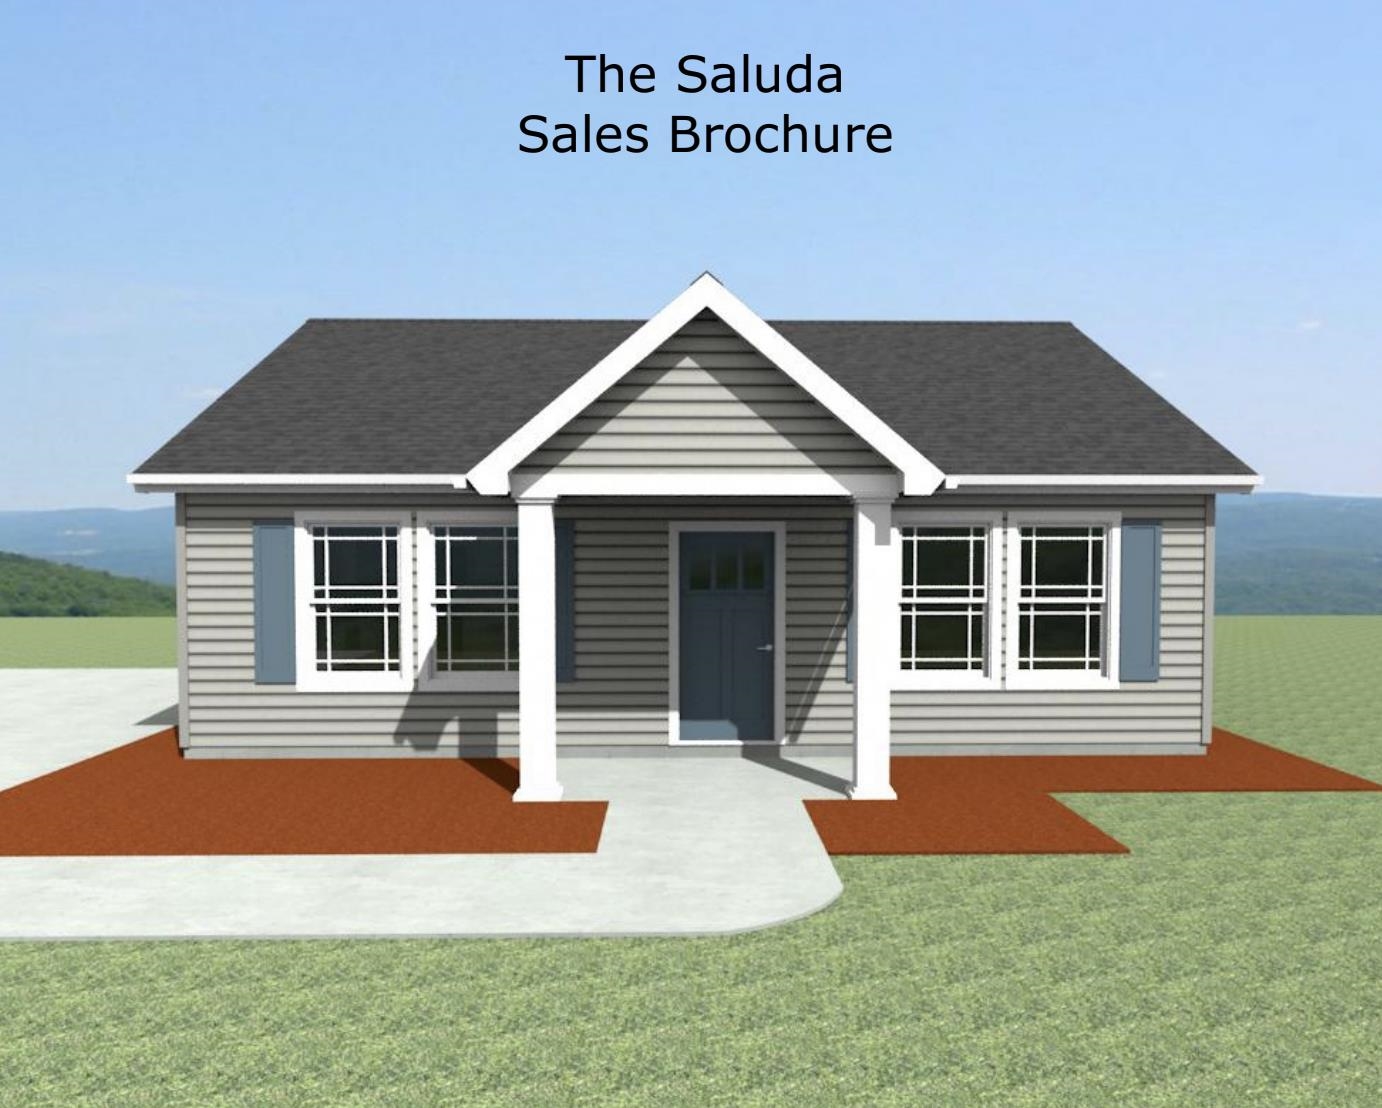 The Saluda plan features 2 bedrooms and 2 bathrooms. The spacious living area is open into the kitchen/dining area. The master bedroom features a tray ceiling and full bathroom. 30-year architectural shingles, site-built construction, and a "2-10" warranty are included to give you peace of mind. Lot 15. Preferred Lender/Attorney Closing Costs Incentive Offered!